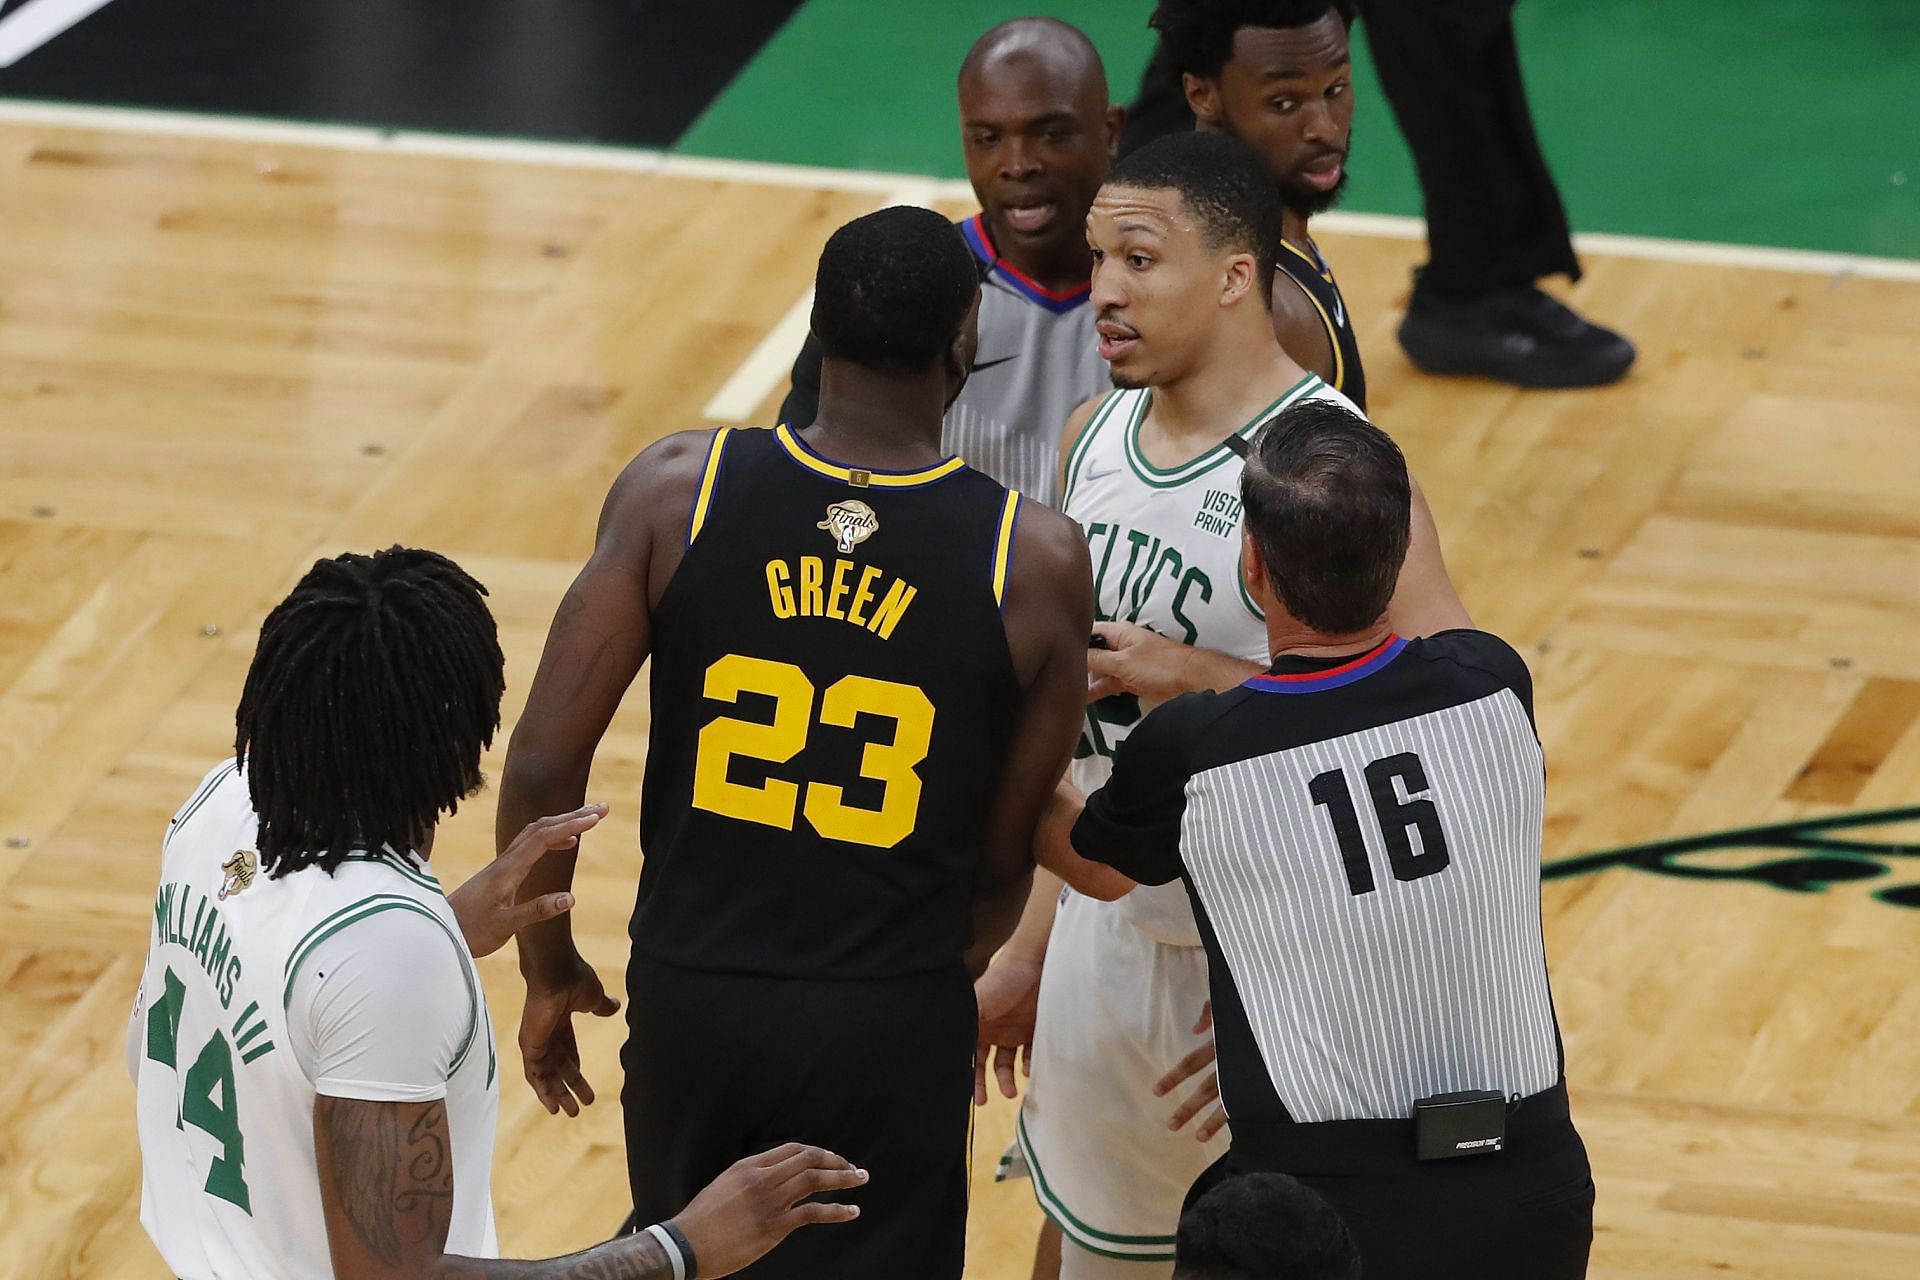 Draymond Green asserts he&#039;s no longer the bully he once was earlier in his career. [Photo: MassLive.com]